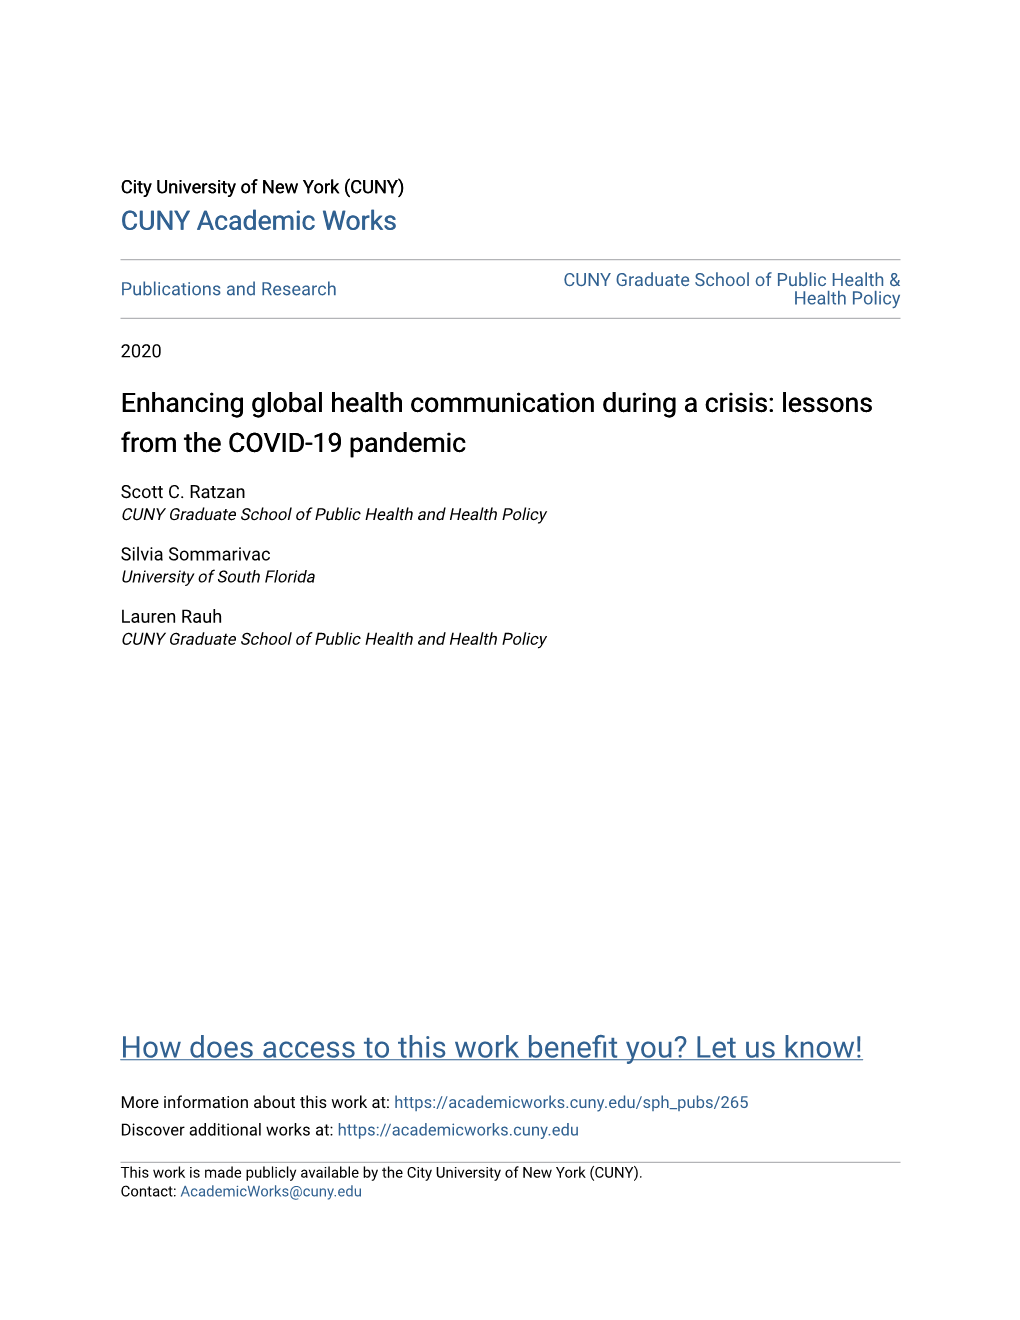 Enhancing Global Health Communication During a Crisis: Lessons from the COVID-19 Pandemic